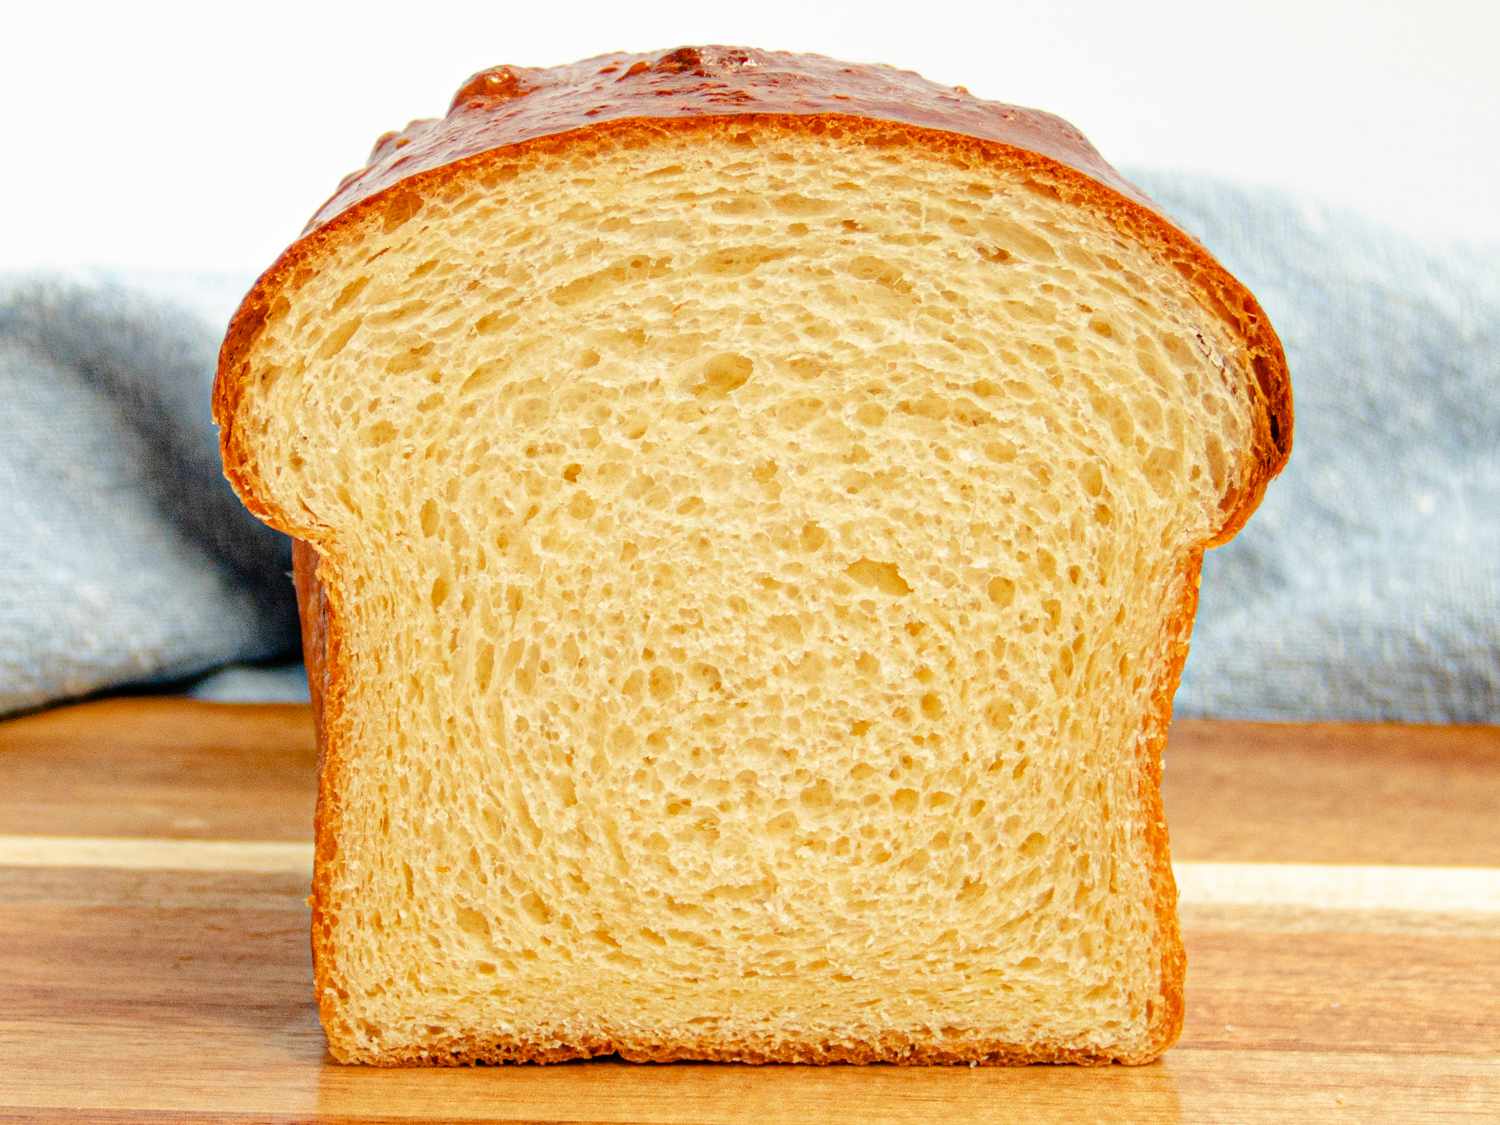 Cross-section of a brioche loaf